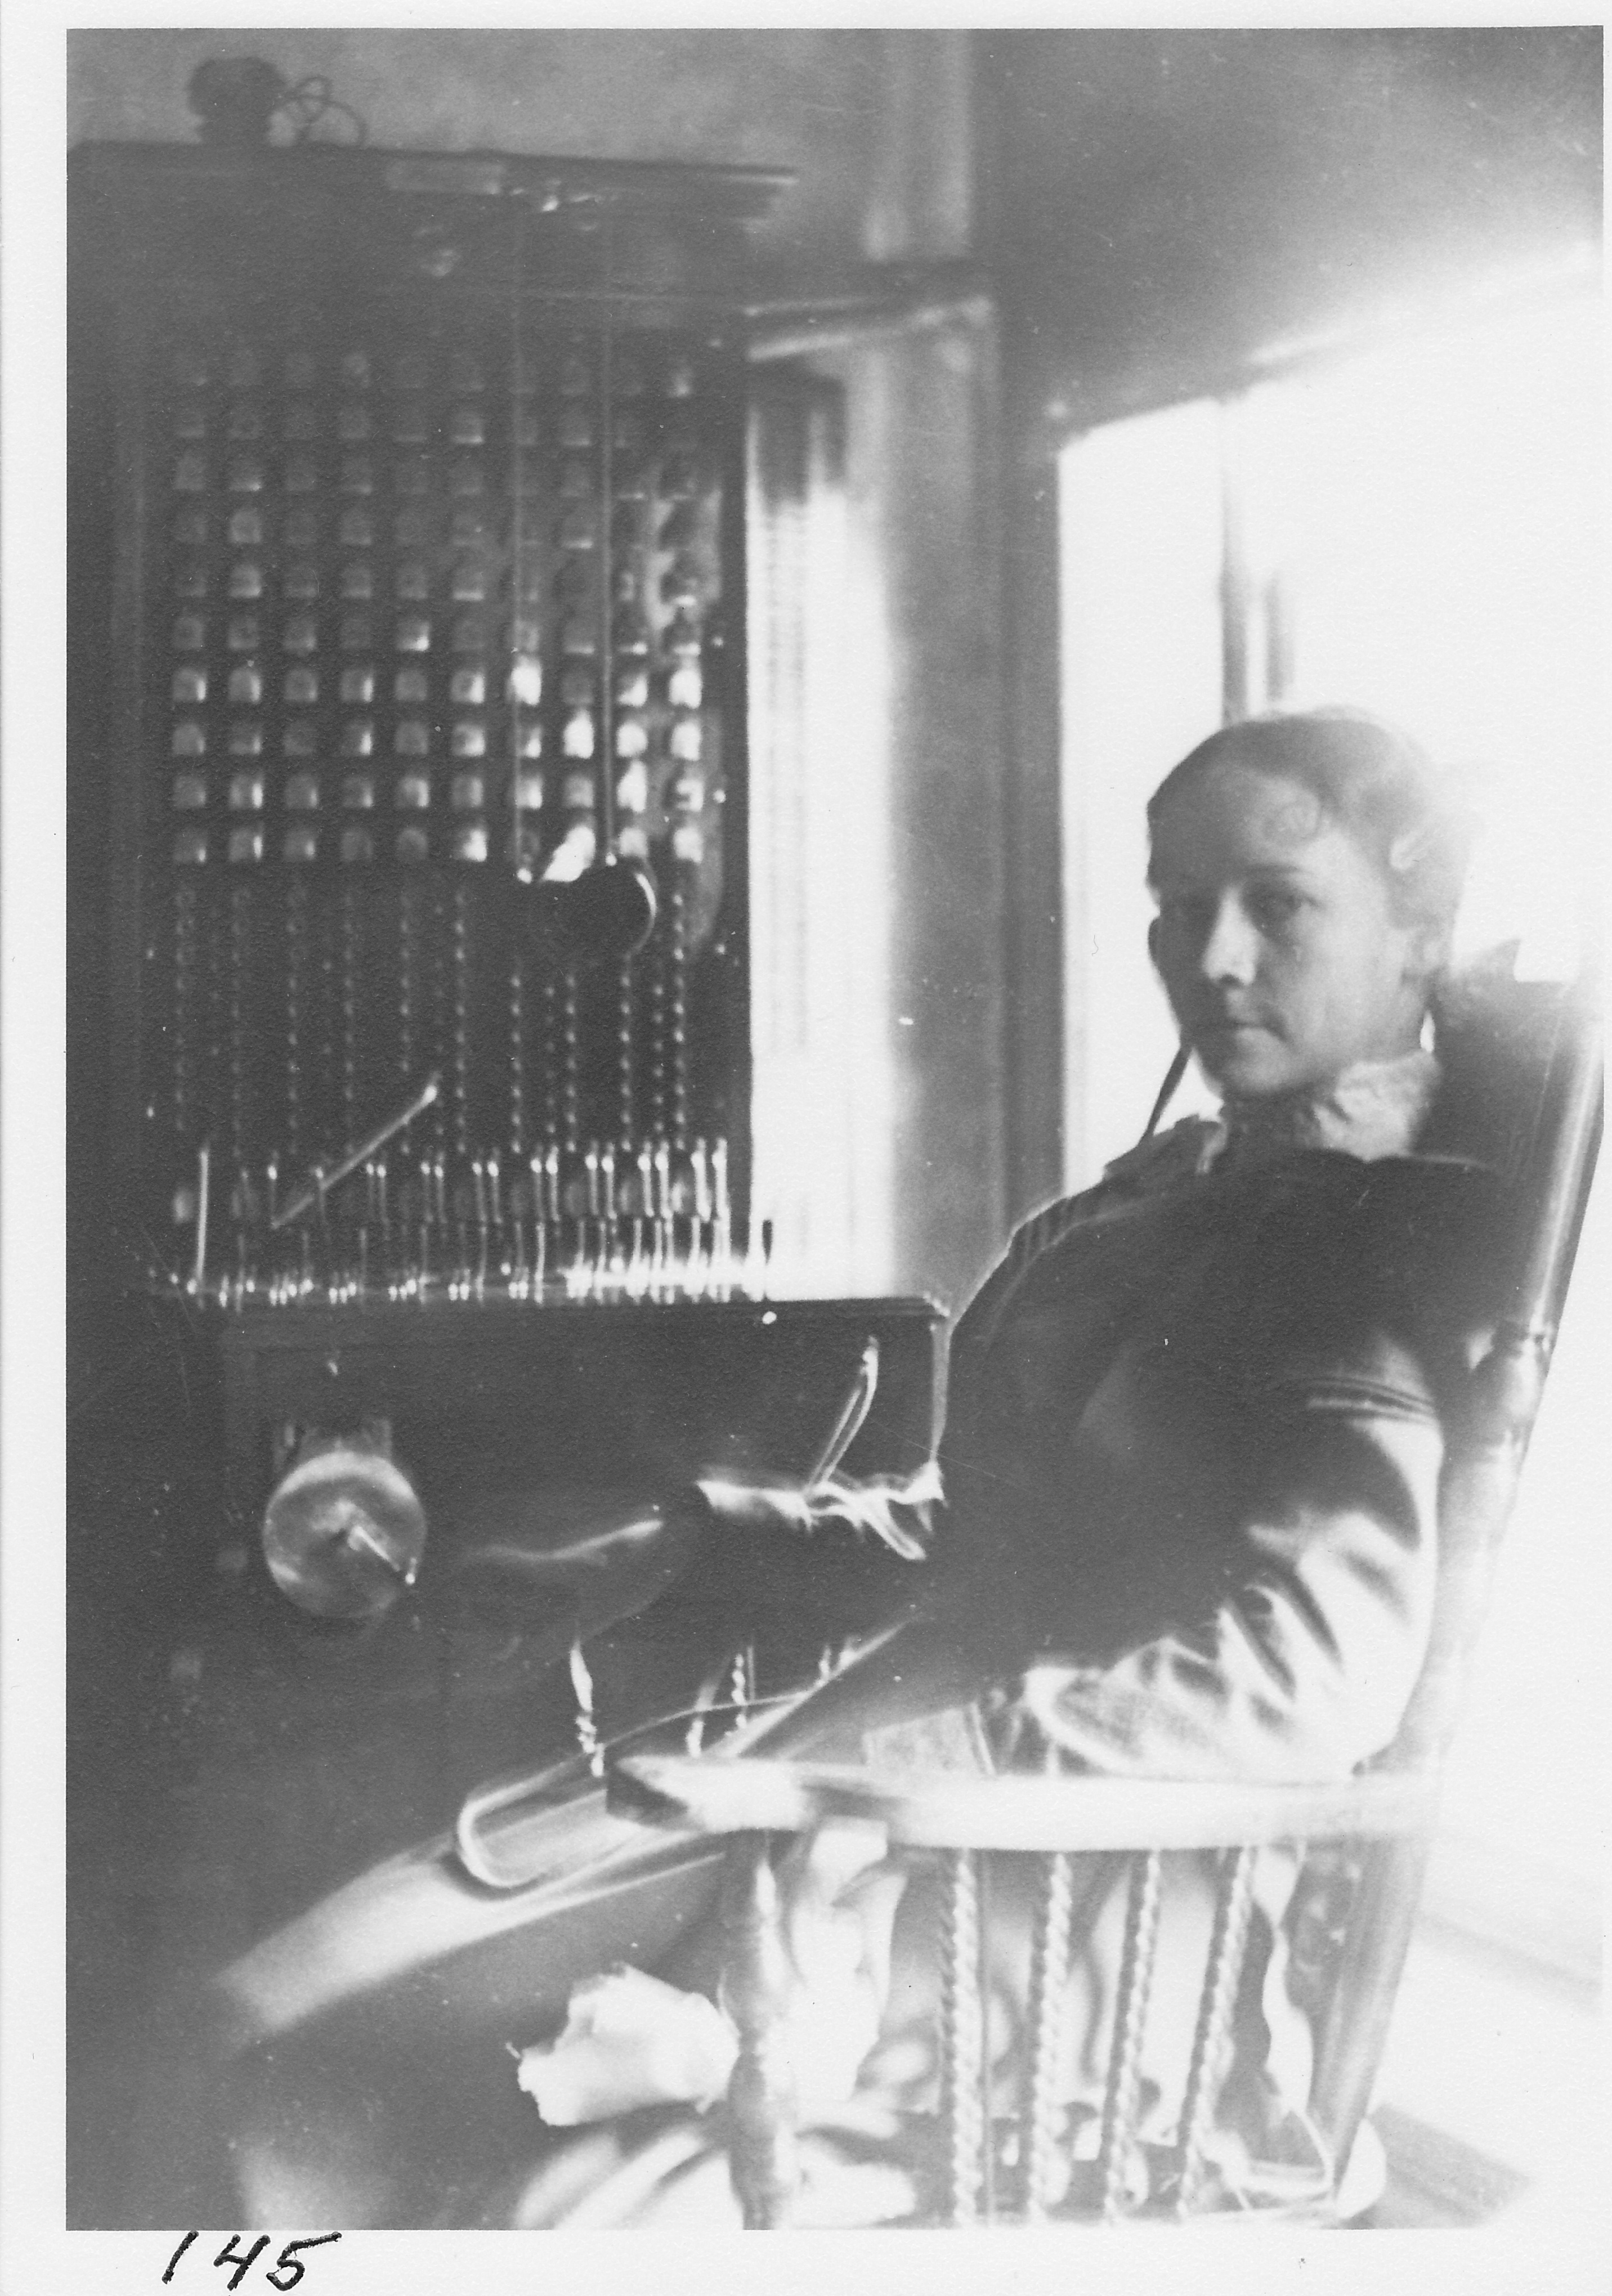 First telephone switchboard in Morenci, located on the second floor public room of Hotel Saulsbury. Nellie M. Saulsbury was the first operator.